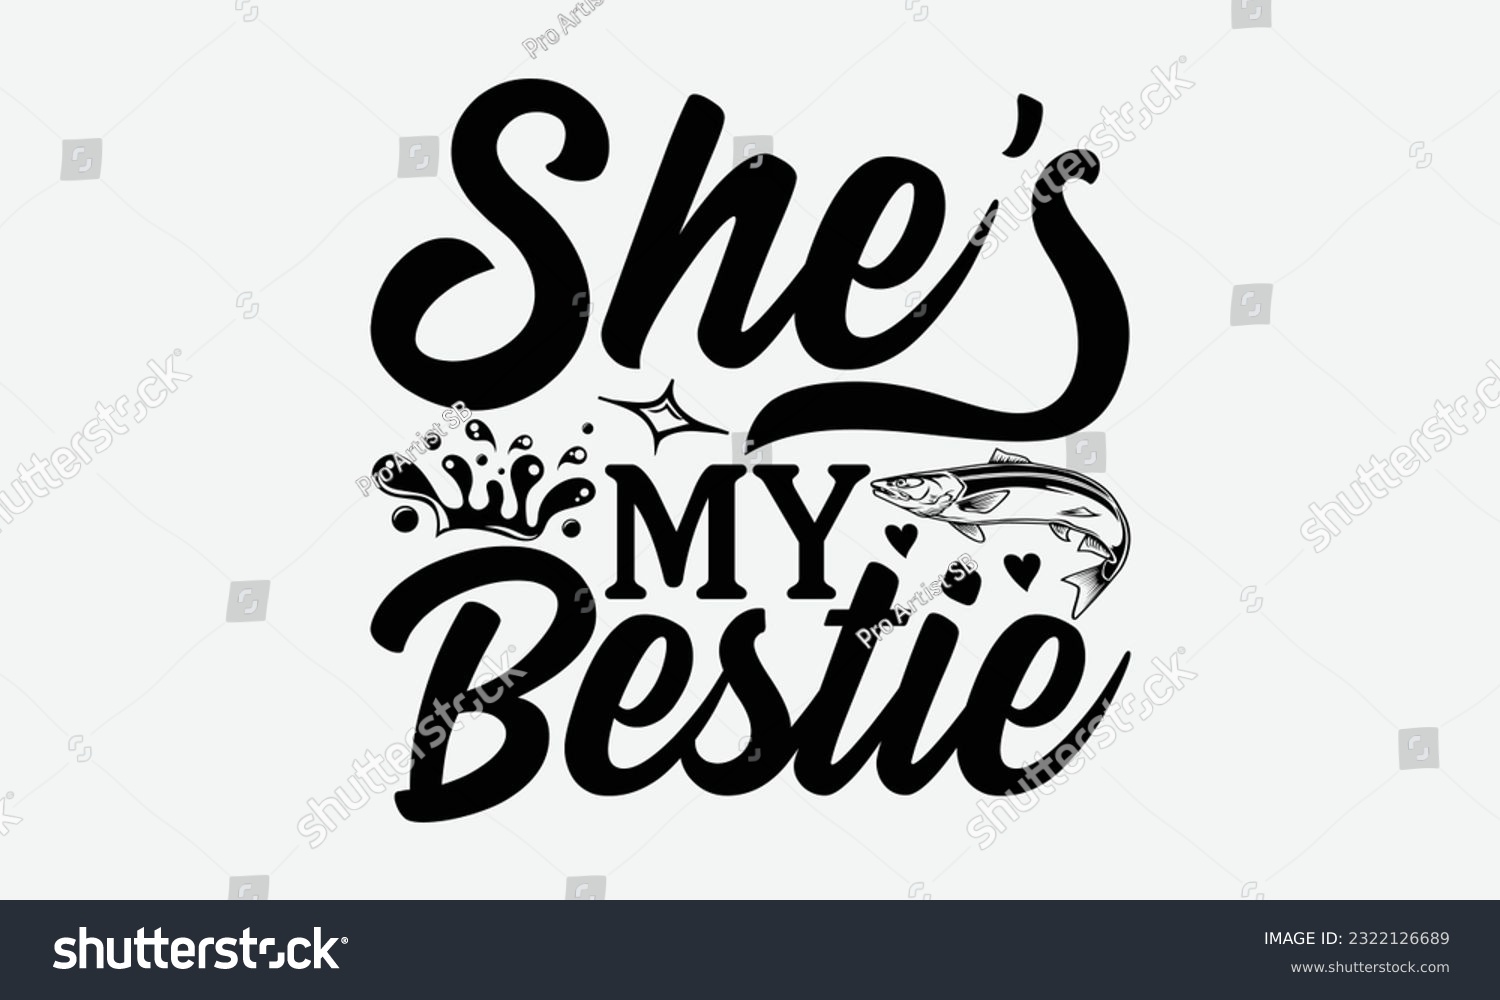 SVG of She’s My Bestie - Fishing SVG Design, Fisherman Quotes, Hand Written Vector T-shirt Design, For Prints on Mugs and Bags, Posters. svg